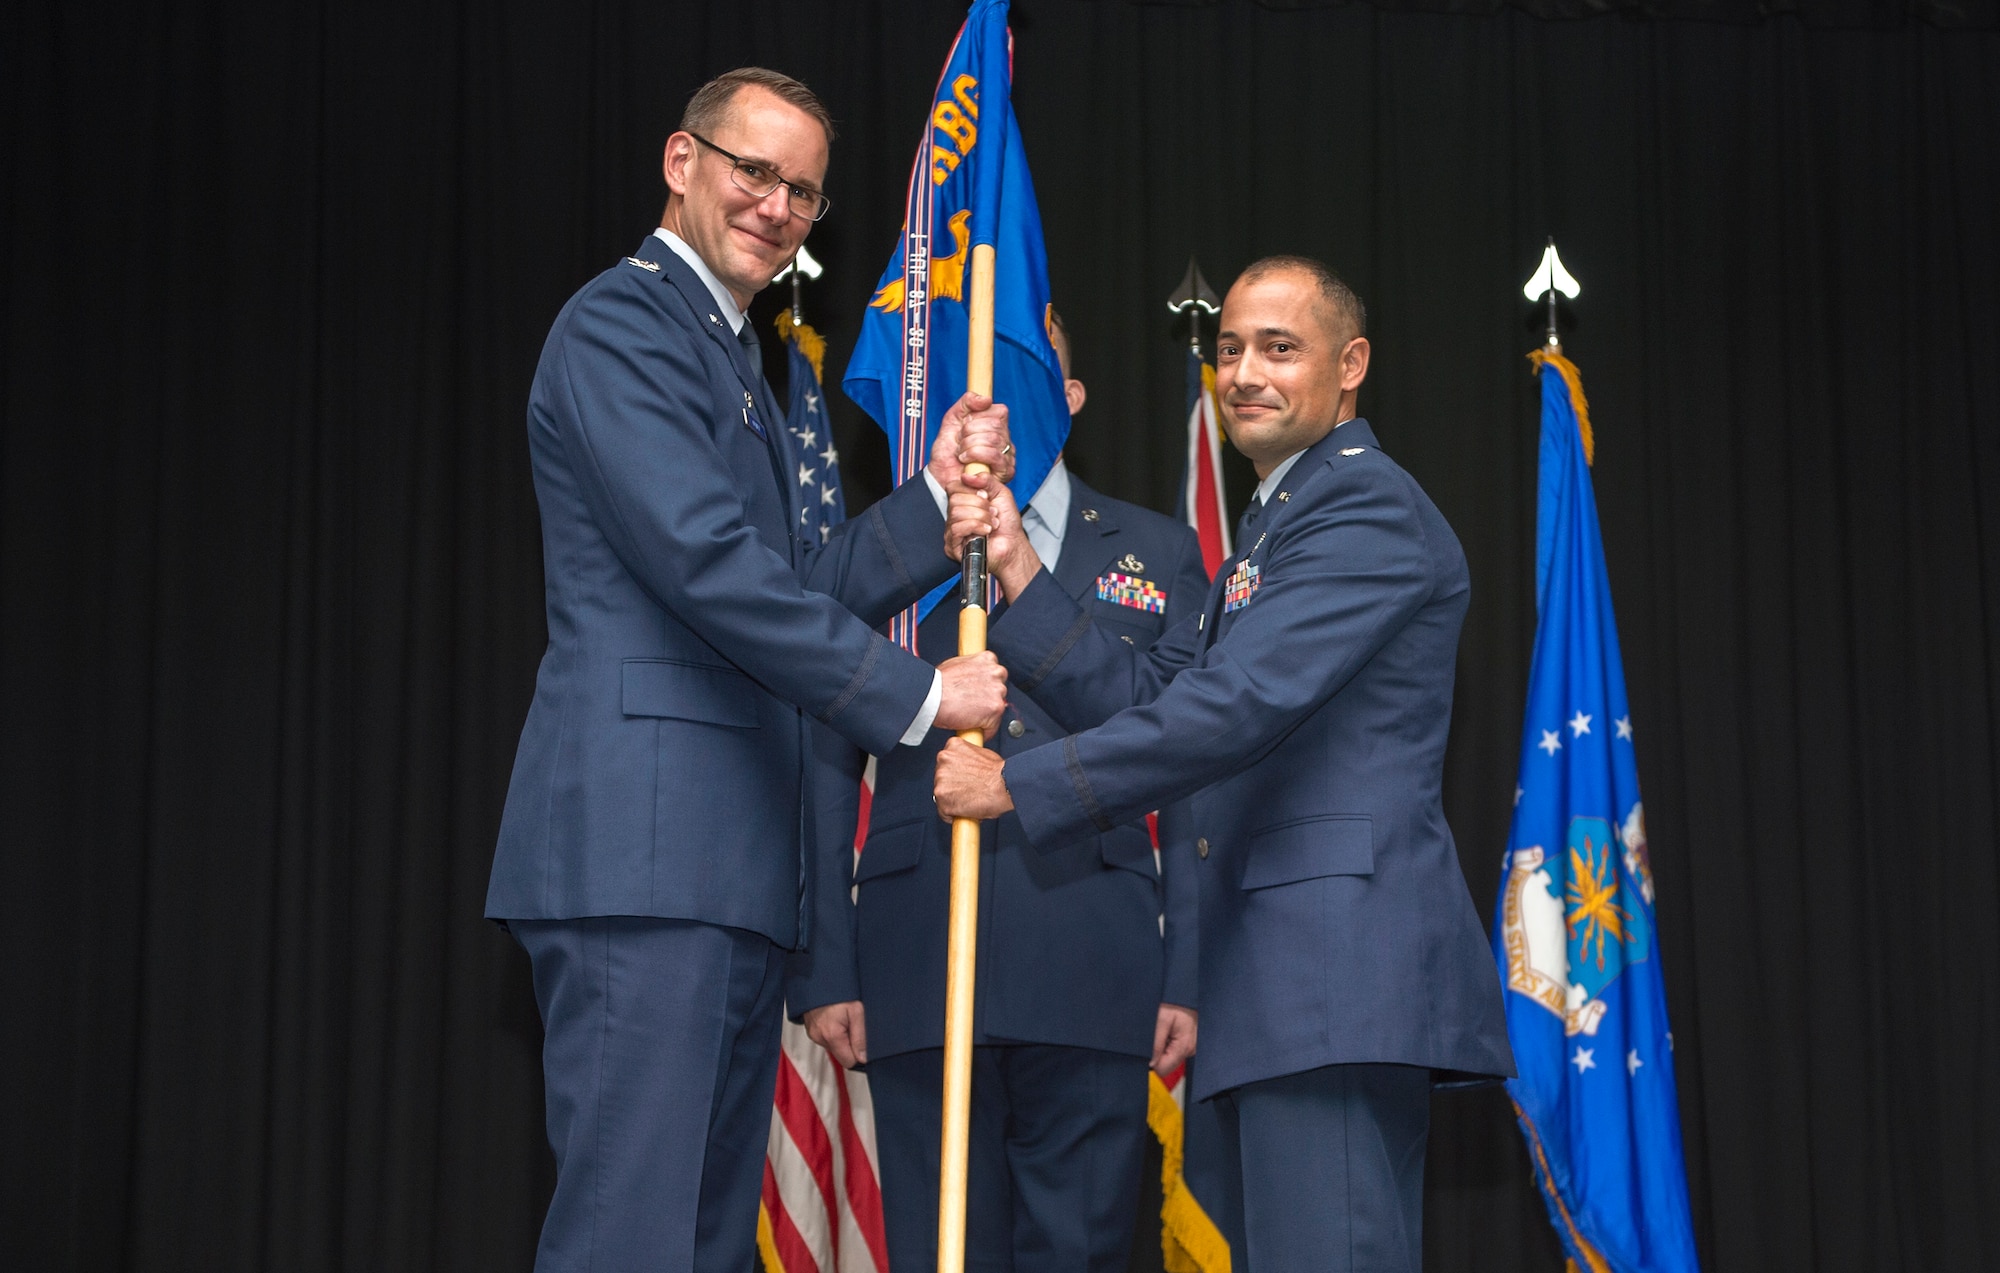 U.S. Air Force Col. Eric Oliver, 422th Air Base Group Commander, hands the guide-on to Lt. Col. Olexis Perez, 422nd Communications Squadron Commander, at RAF Fairford, June 14, 2018. The Change of Command Ceremony is done in front of the squadron to show the formal transfer of authority. (U.S. Air Force photo by Senior Airman Chase Sousa)